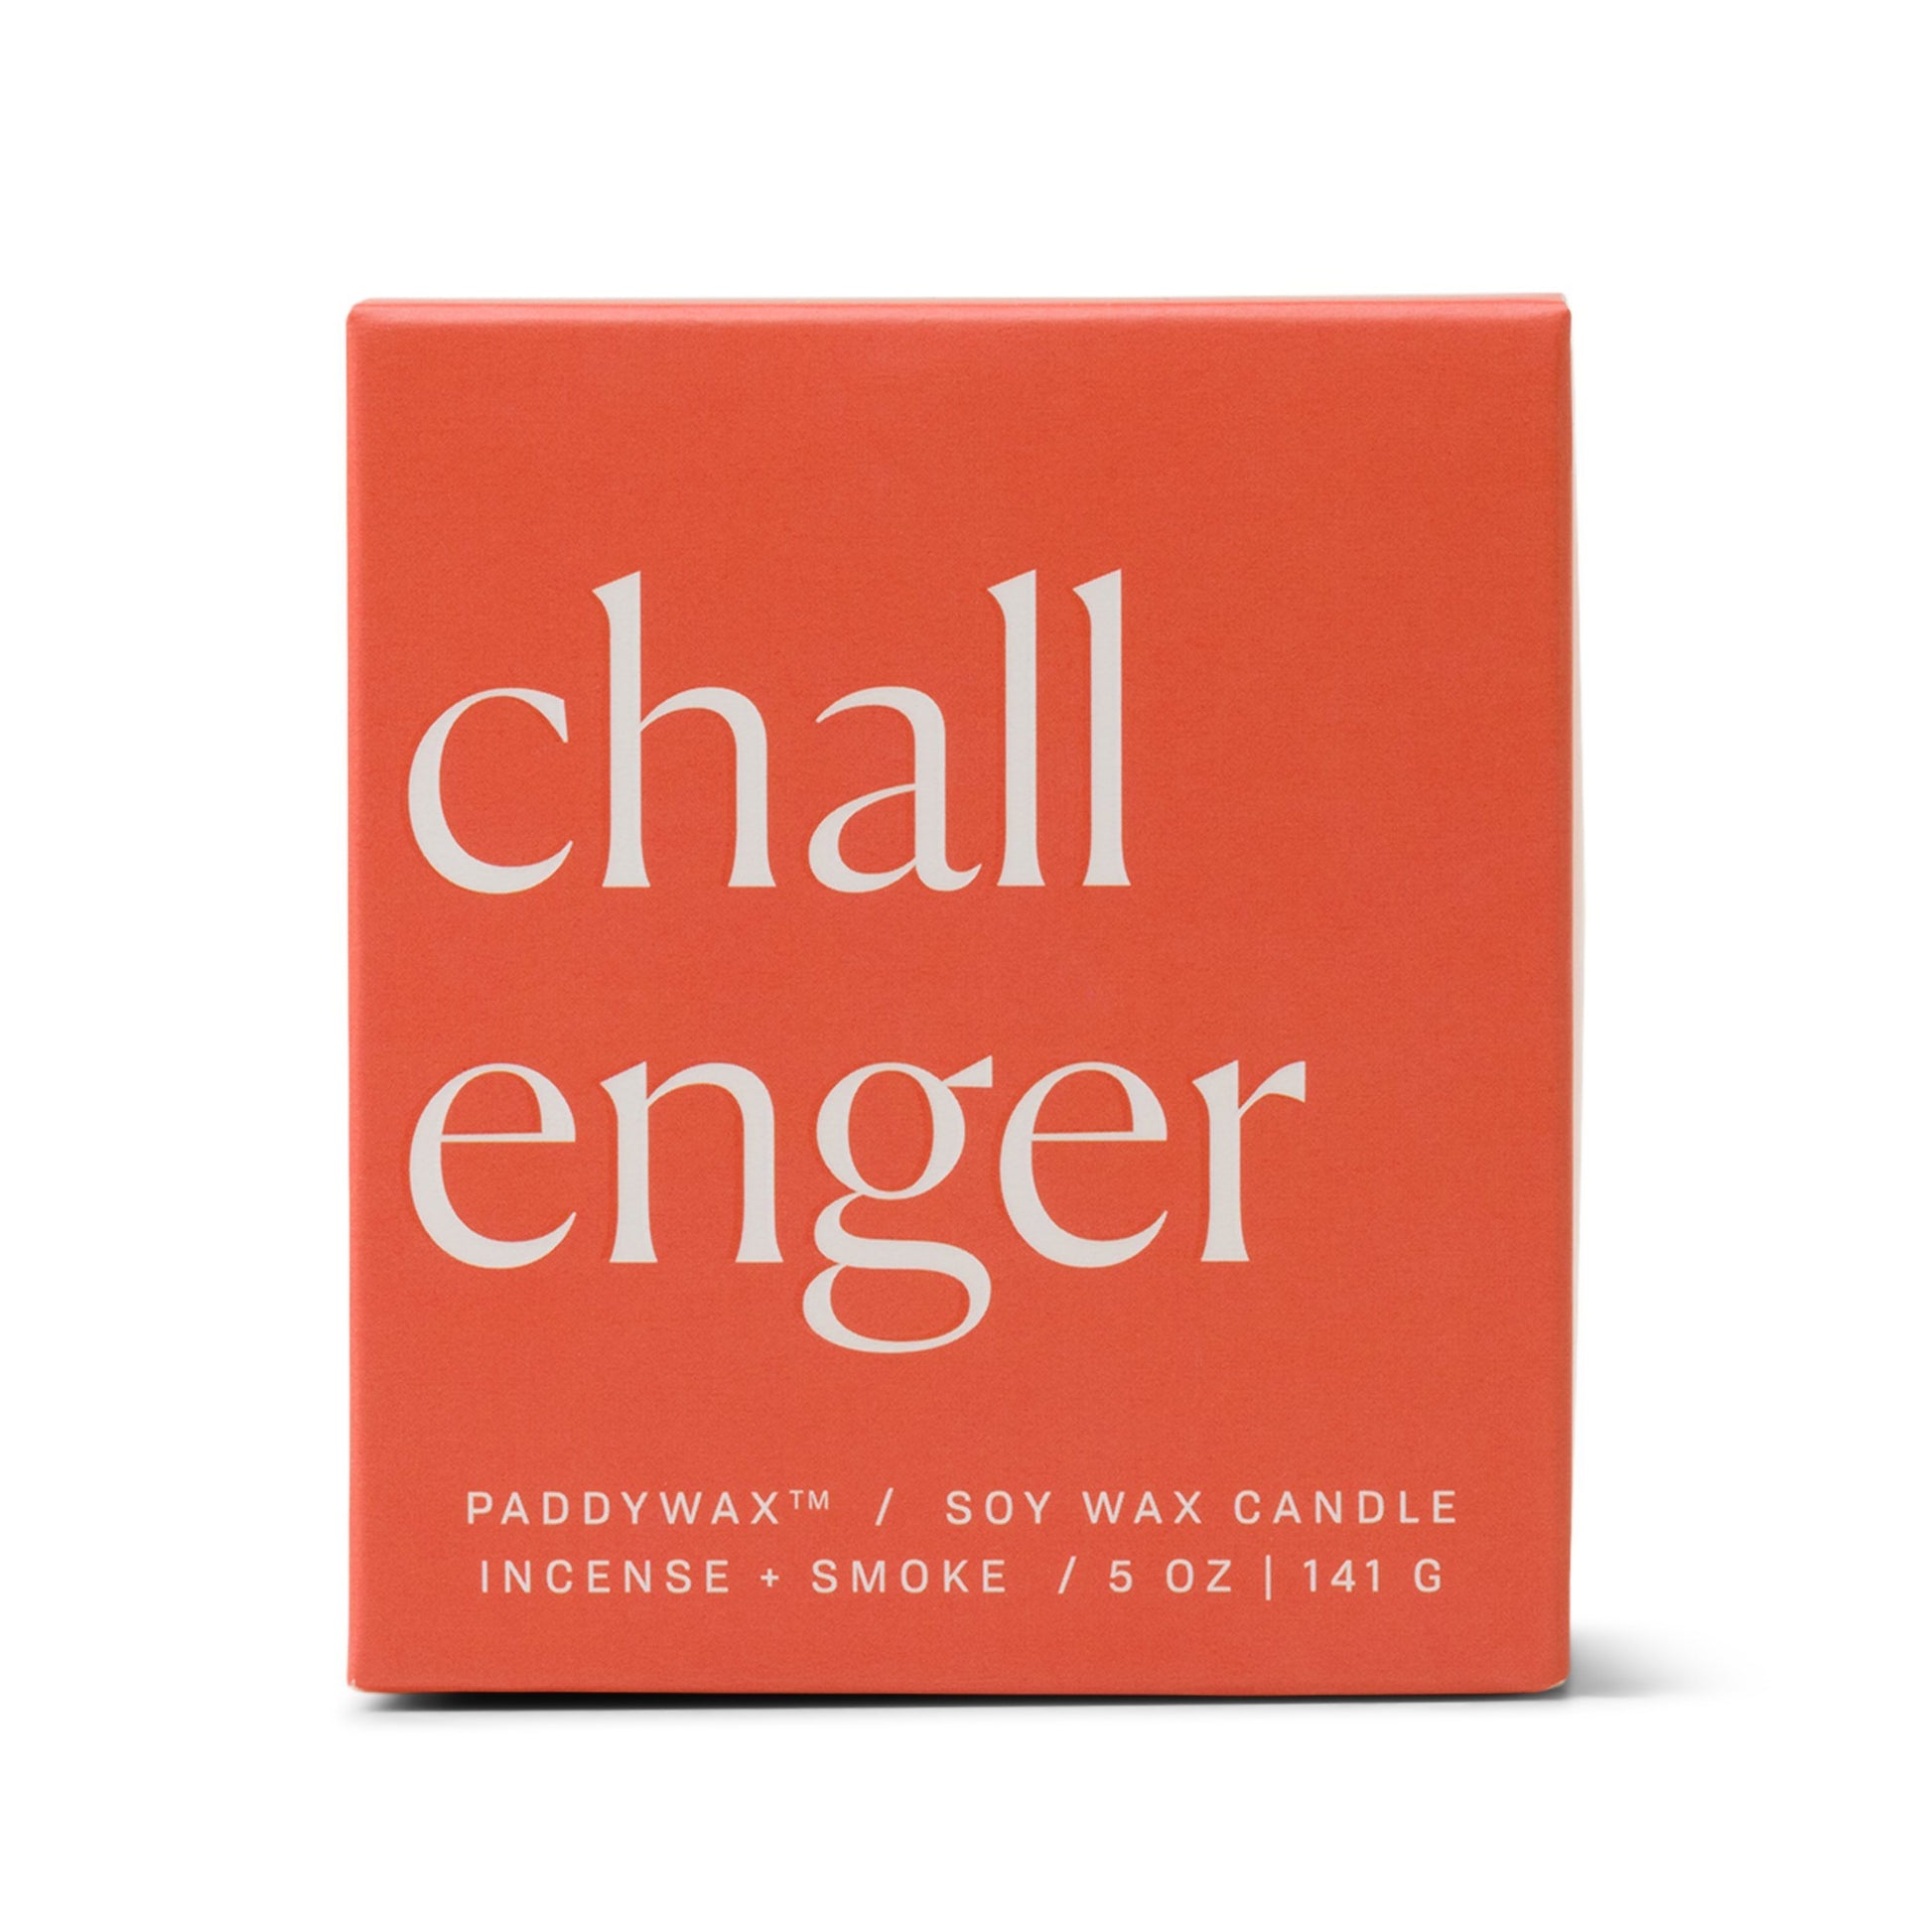 red-orange box which reads "challenger"; also has the number 8 printed on the side